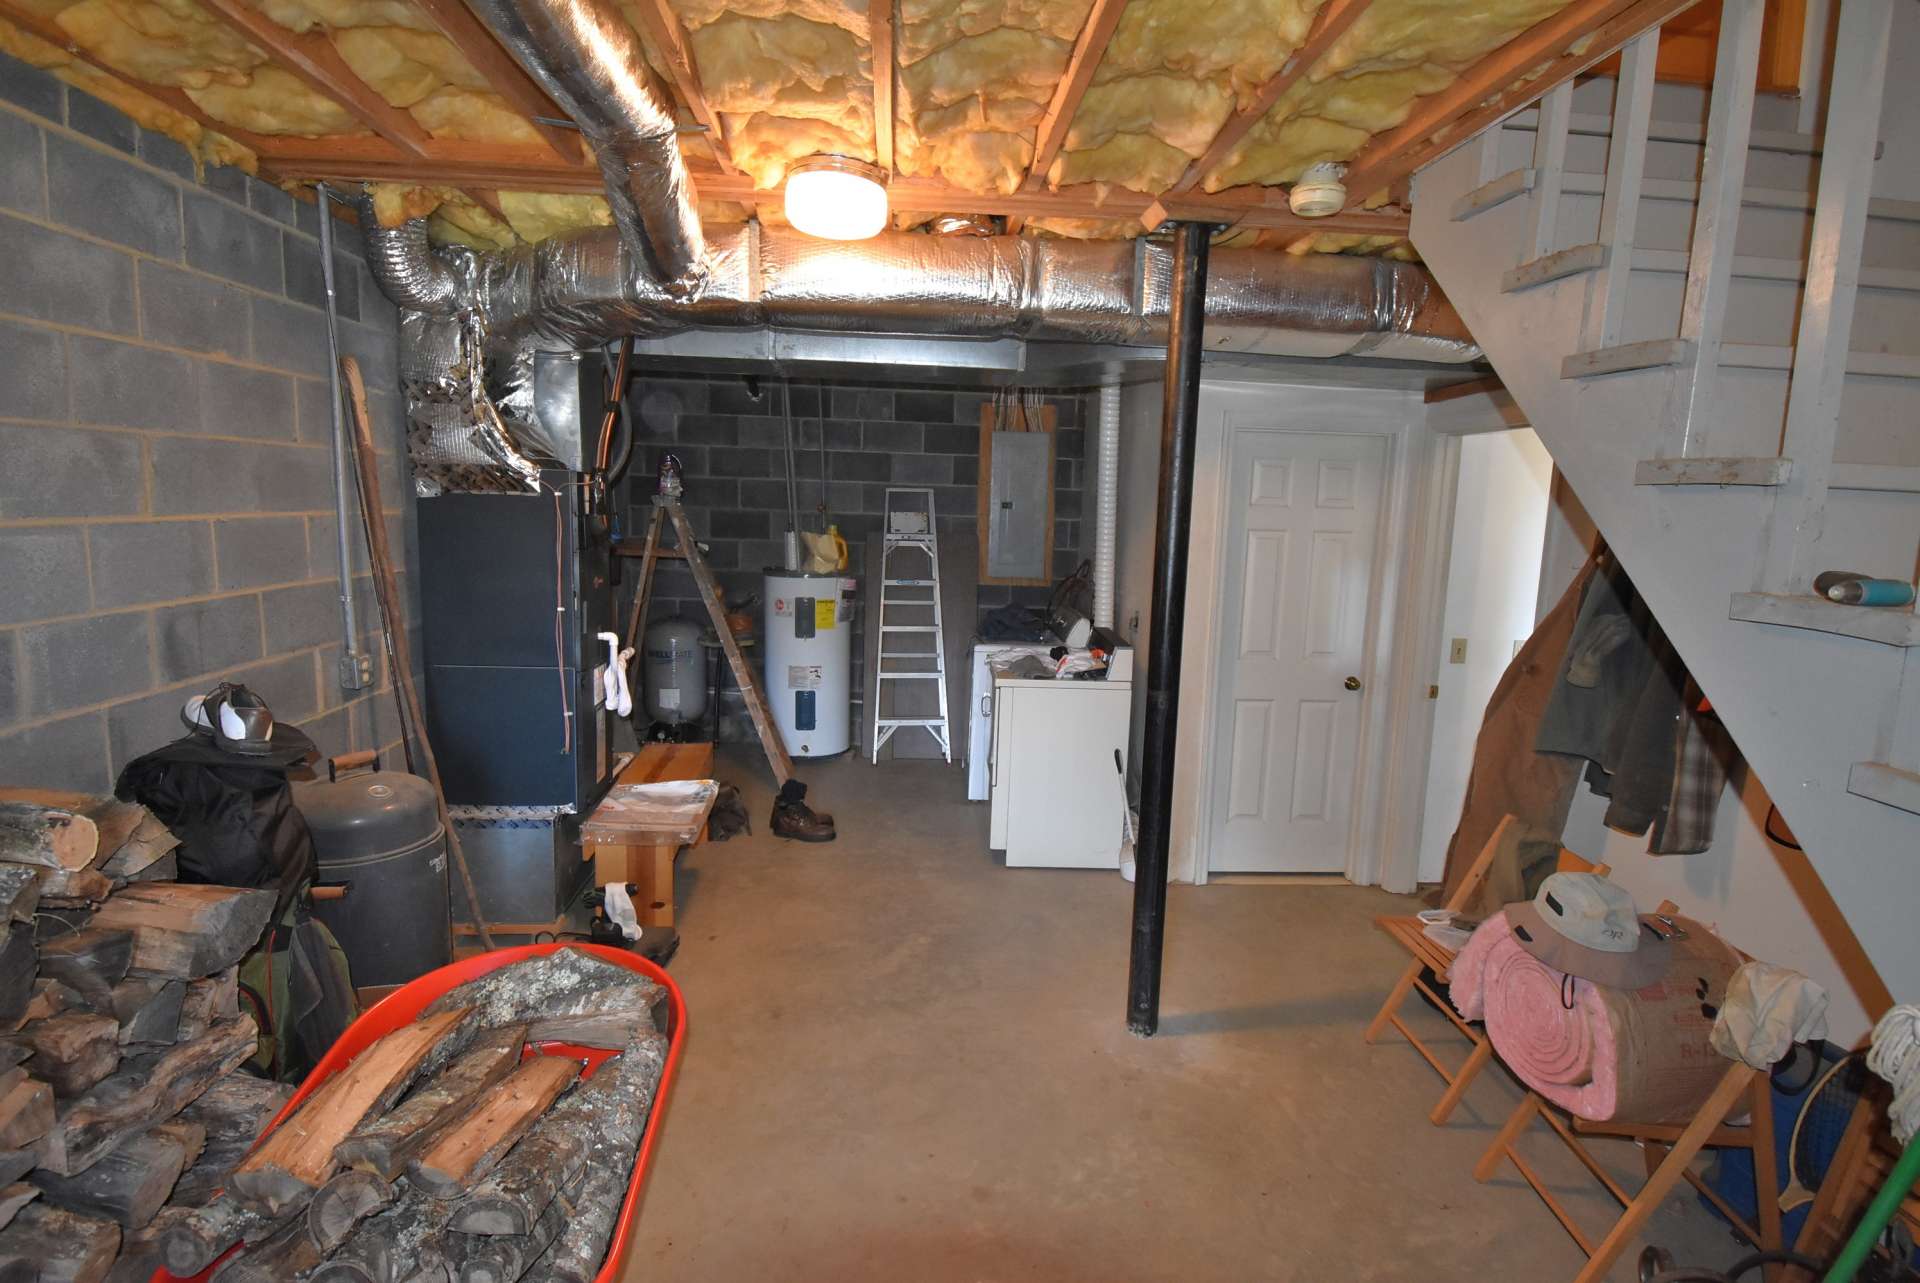 The lower level features the second full bath, accessed via unfinished space that includes the laundry area and plenty of expansion potential. On the other side of the lower level you will find the garage/workshop area.